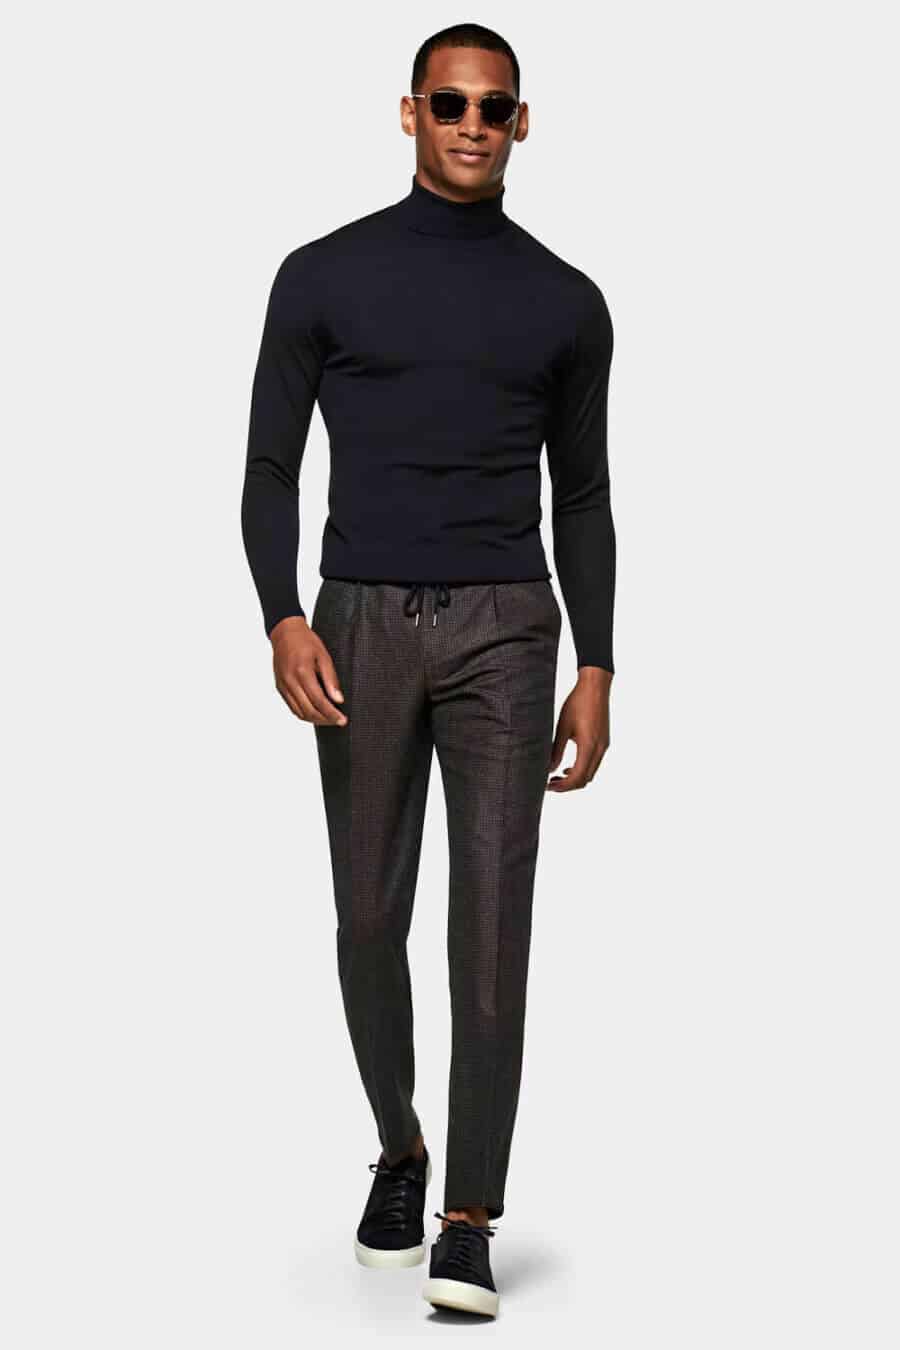 Minimalist turtleneck outfit for men with trousers and sneakers